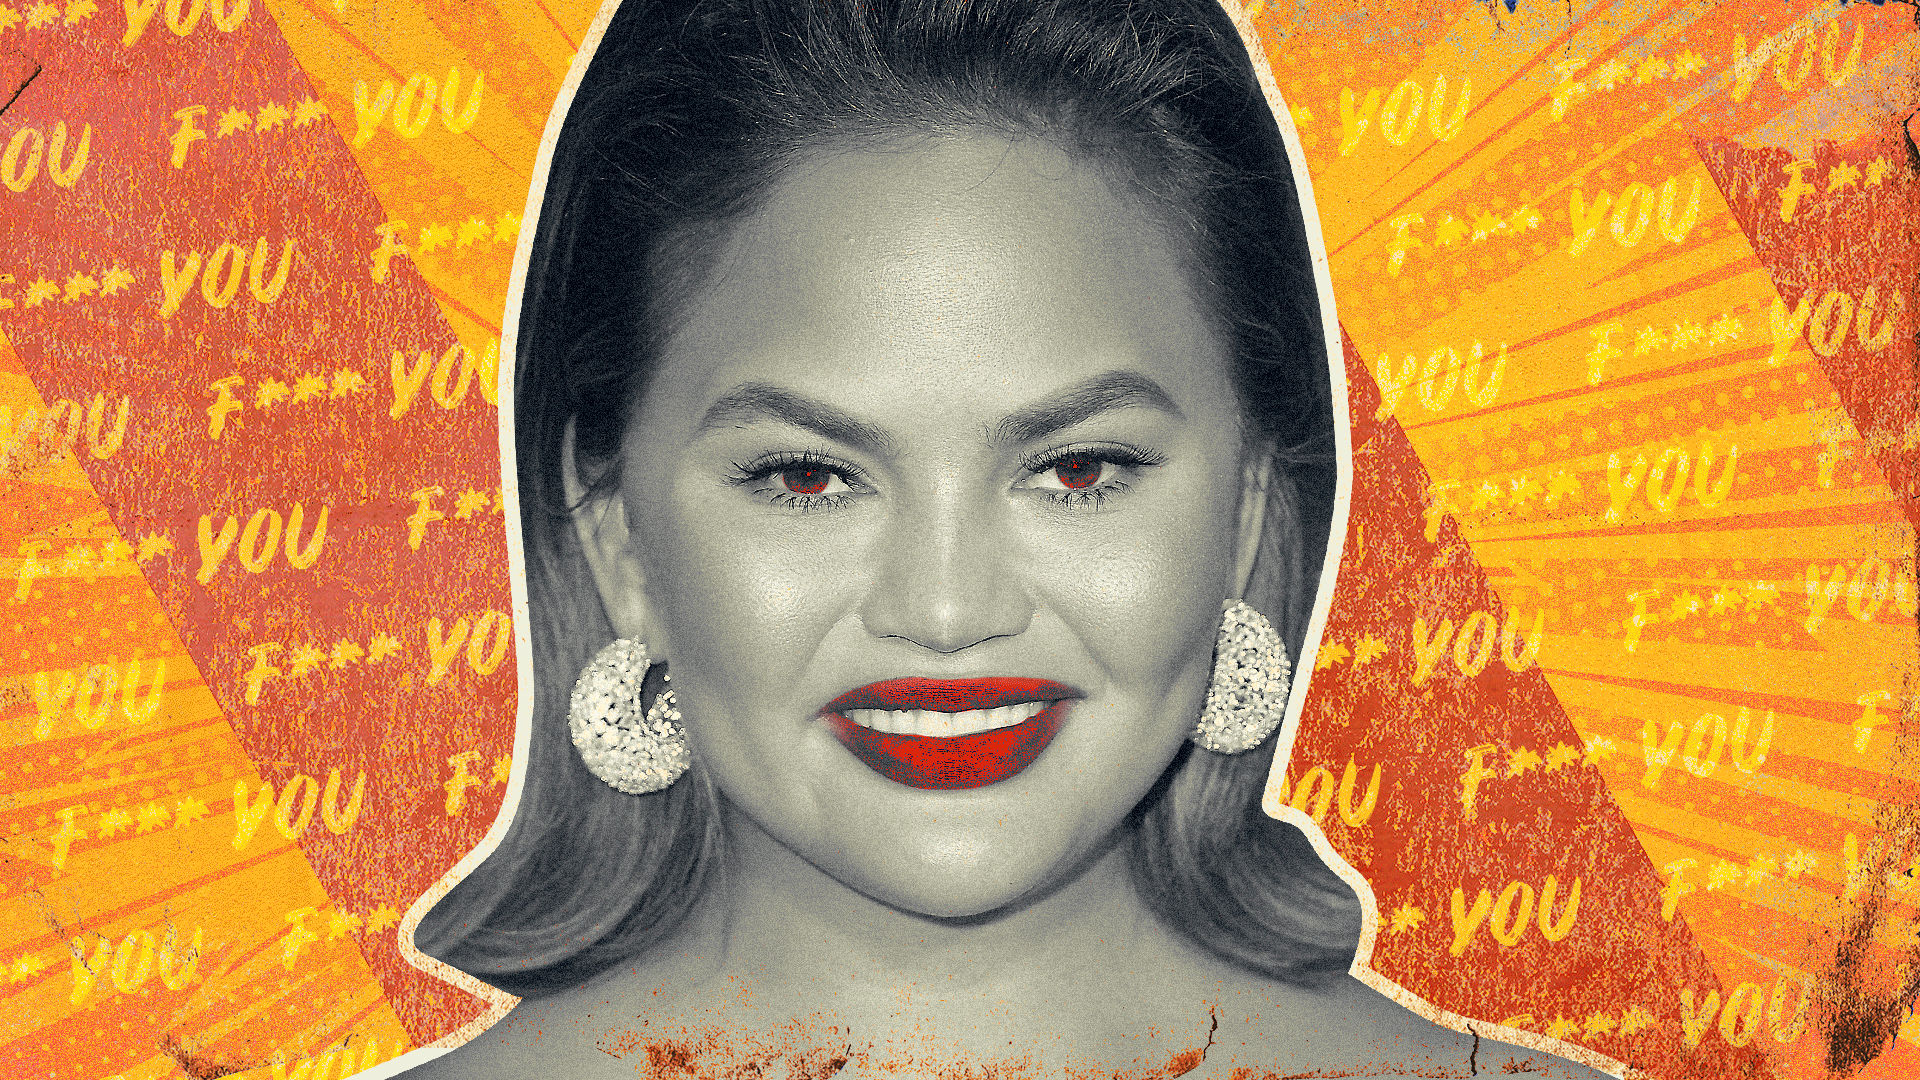 Sorry Chrissy Teigen, 'f*** you' aren't the two words women should use more